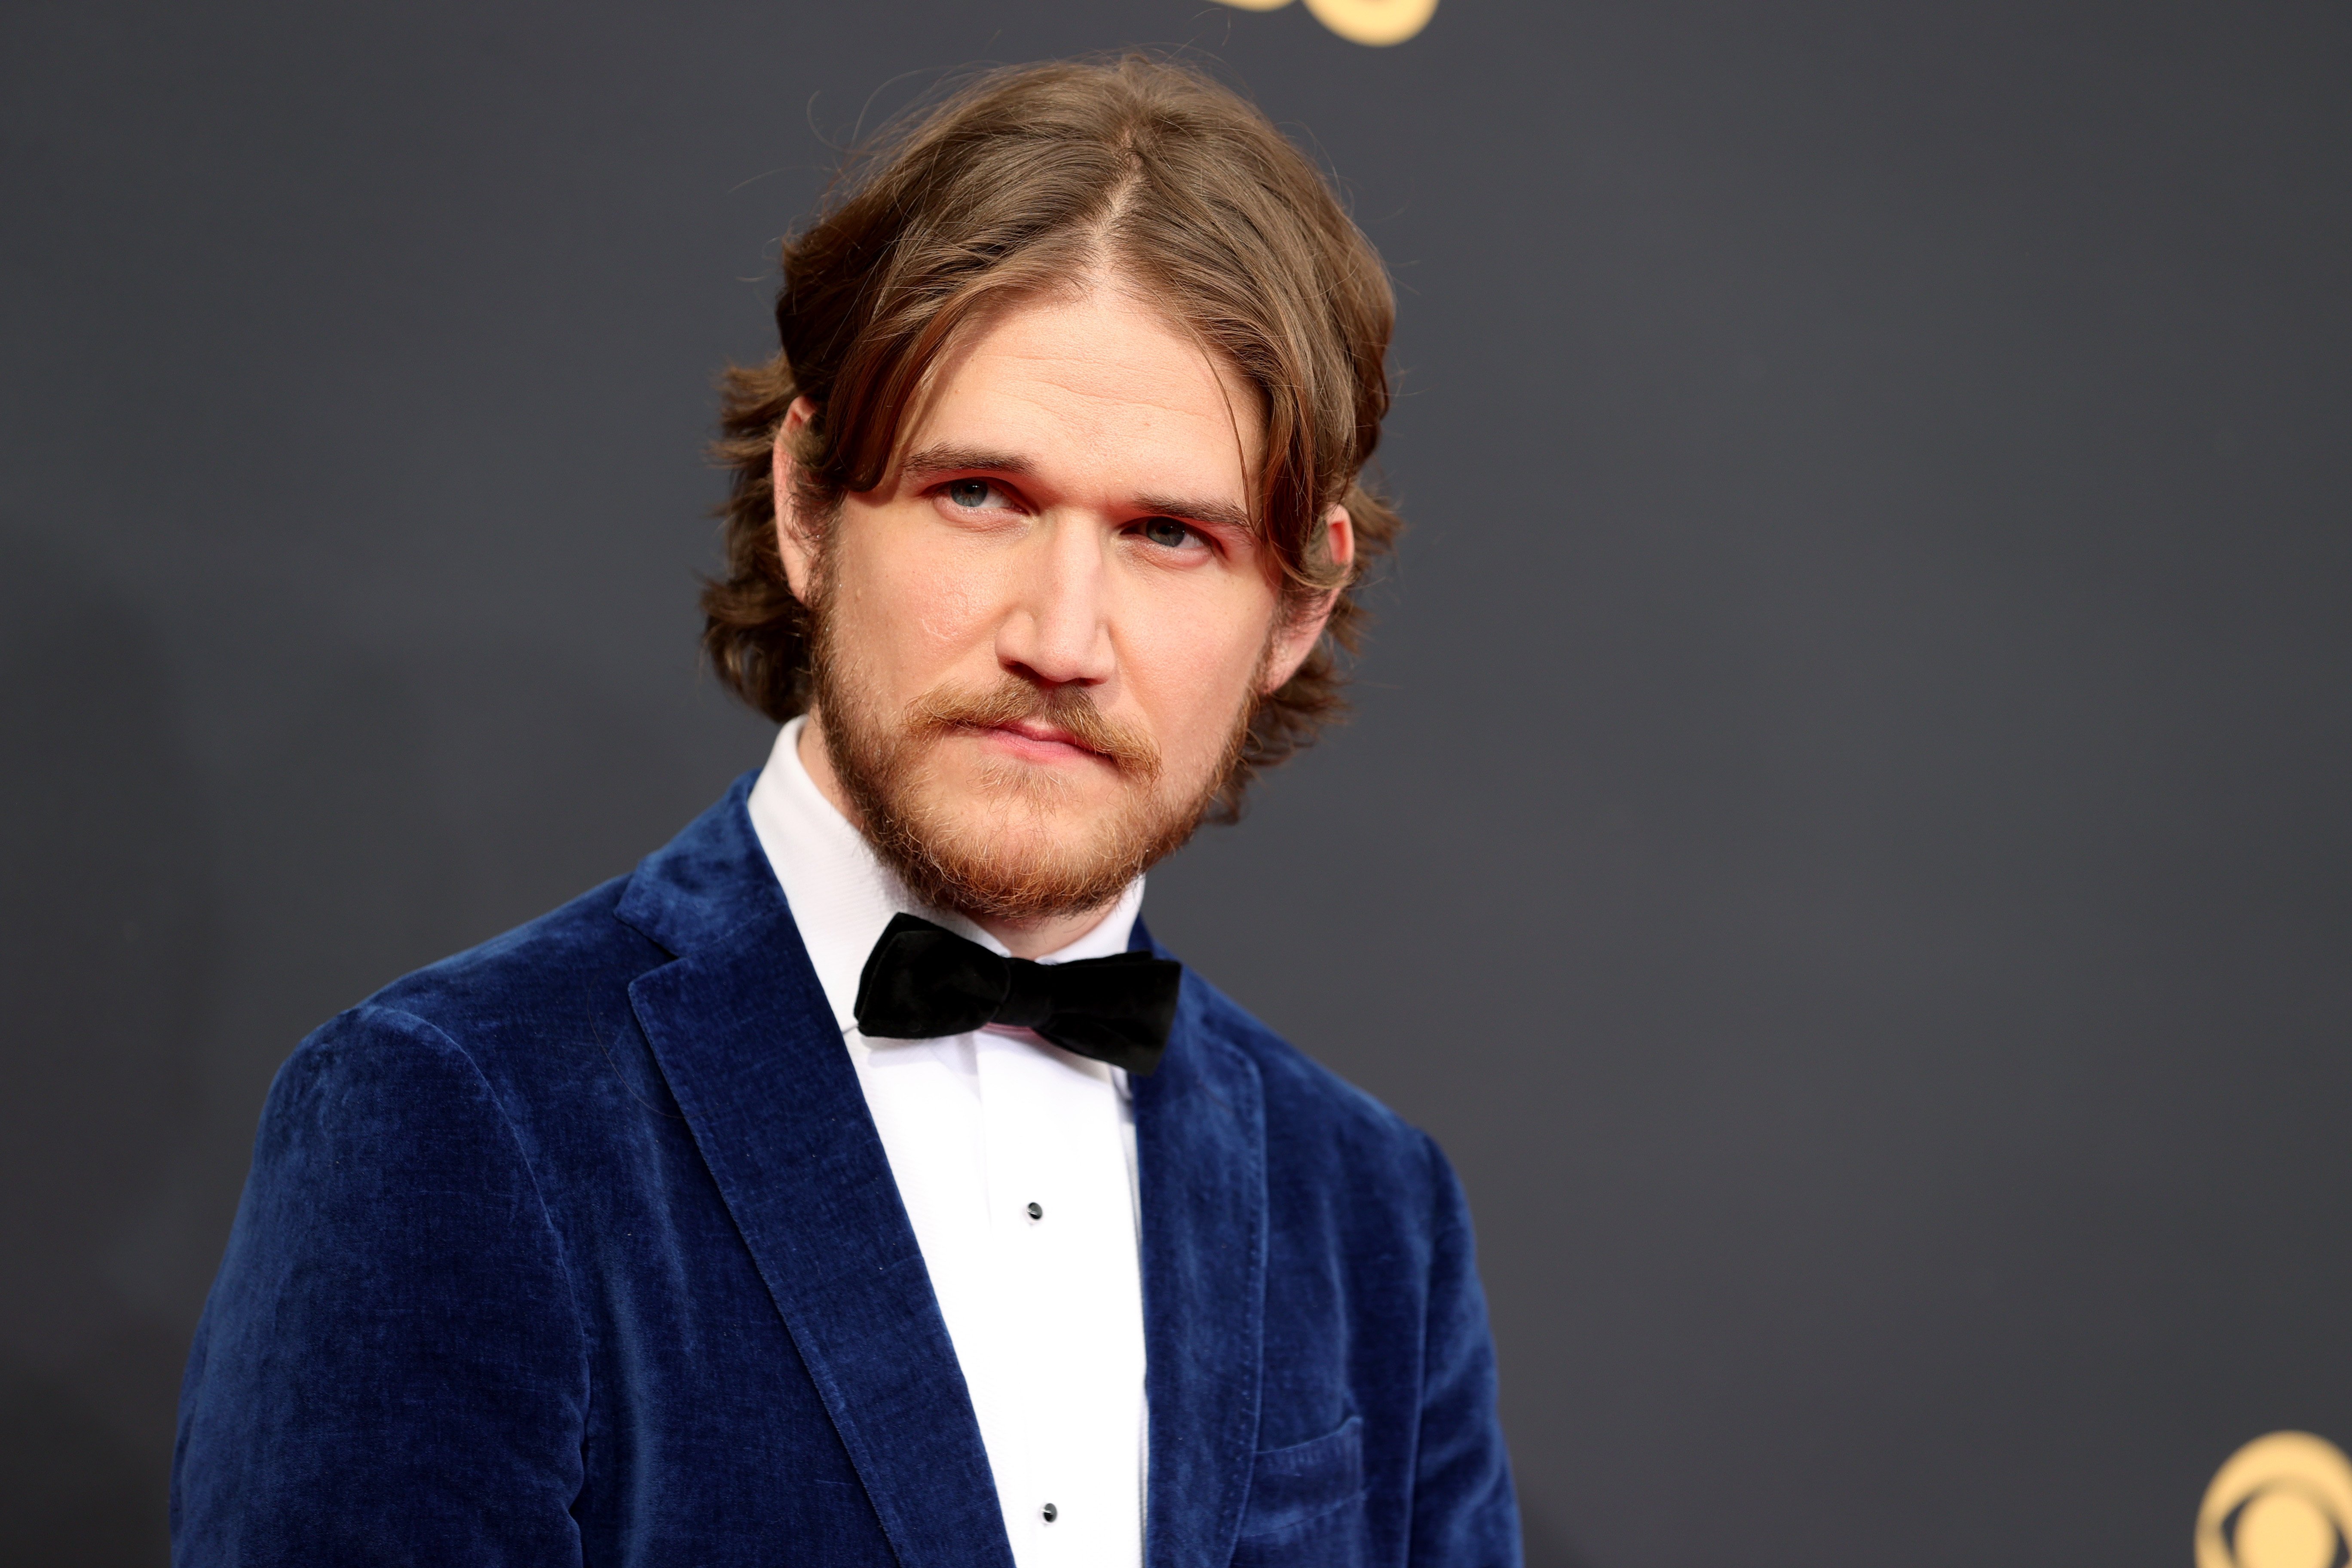 Bo Burnham at the Emmy Awards on September 19, 2021 in Los Angeles. | Source: Getty Images